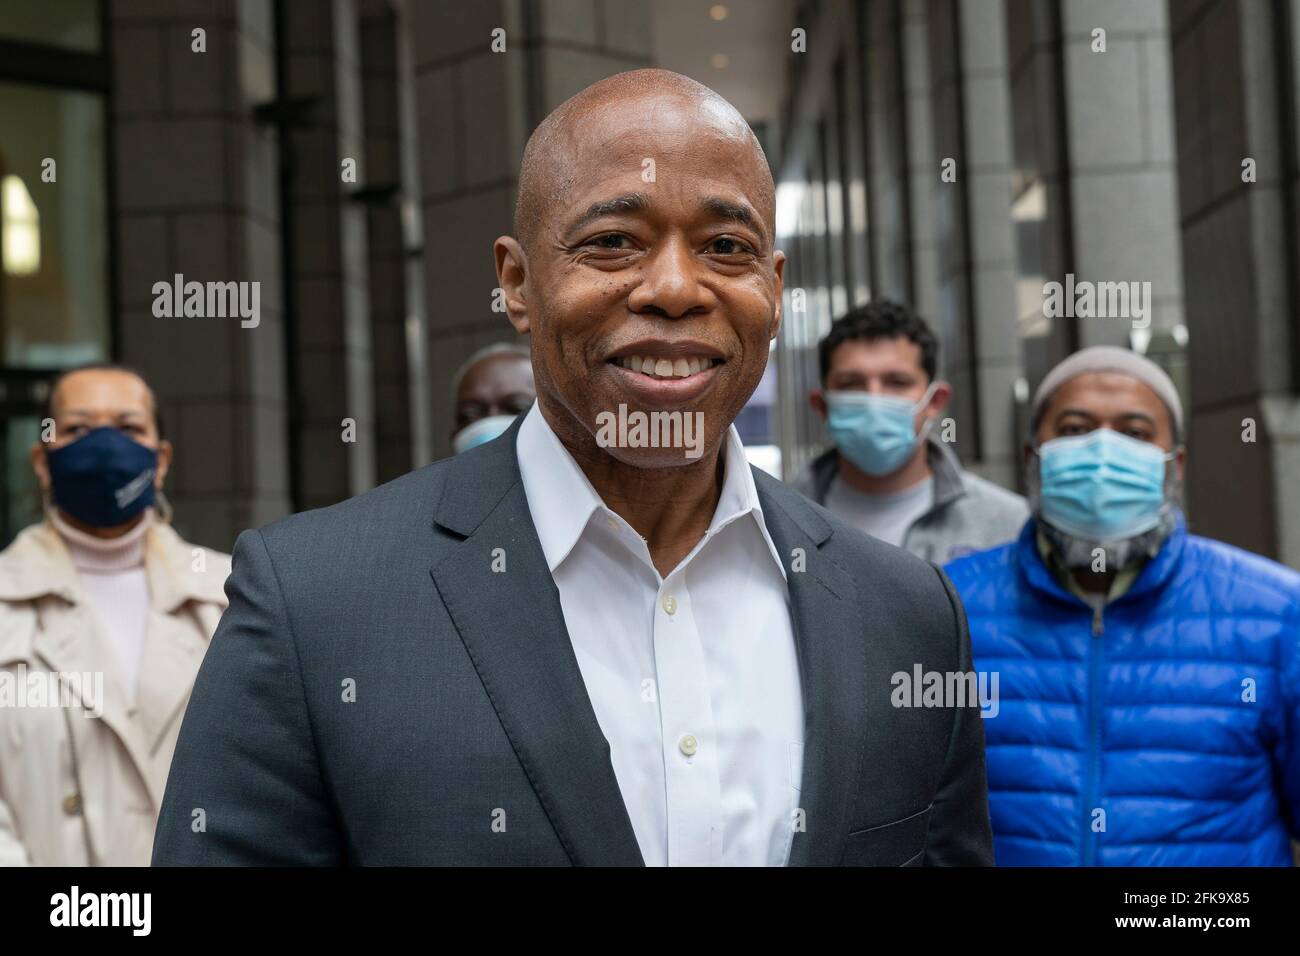 New York, United States. 29th Apr, 2021. Press conference by mayoral  candidate and Brooklyn Borough President Eric Adams in Lower Manhattan in  New York on April 29, 2021. Eric Adams proposed how